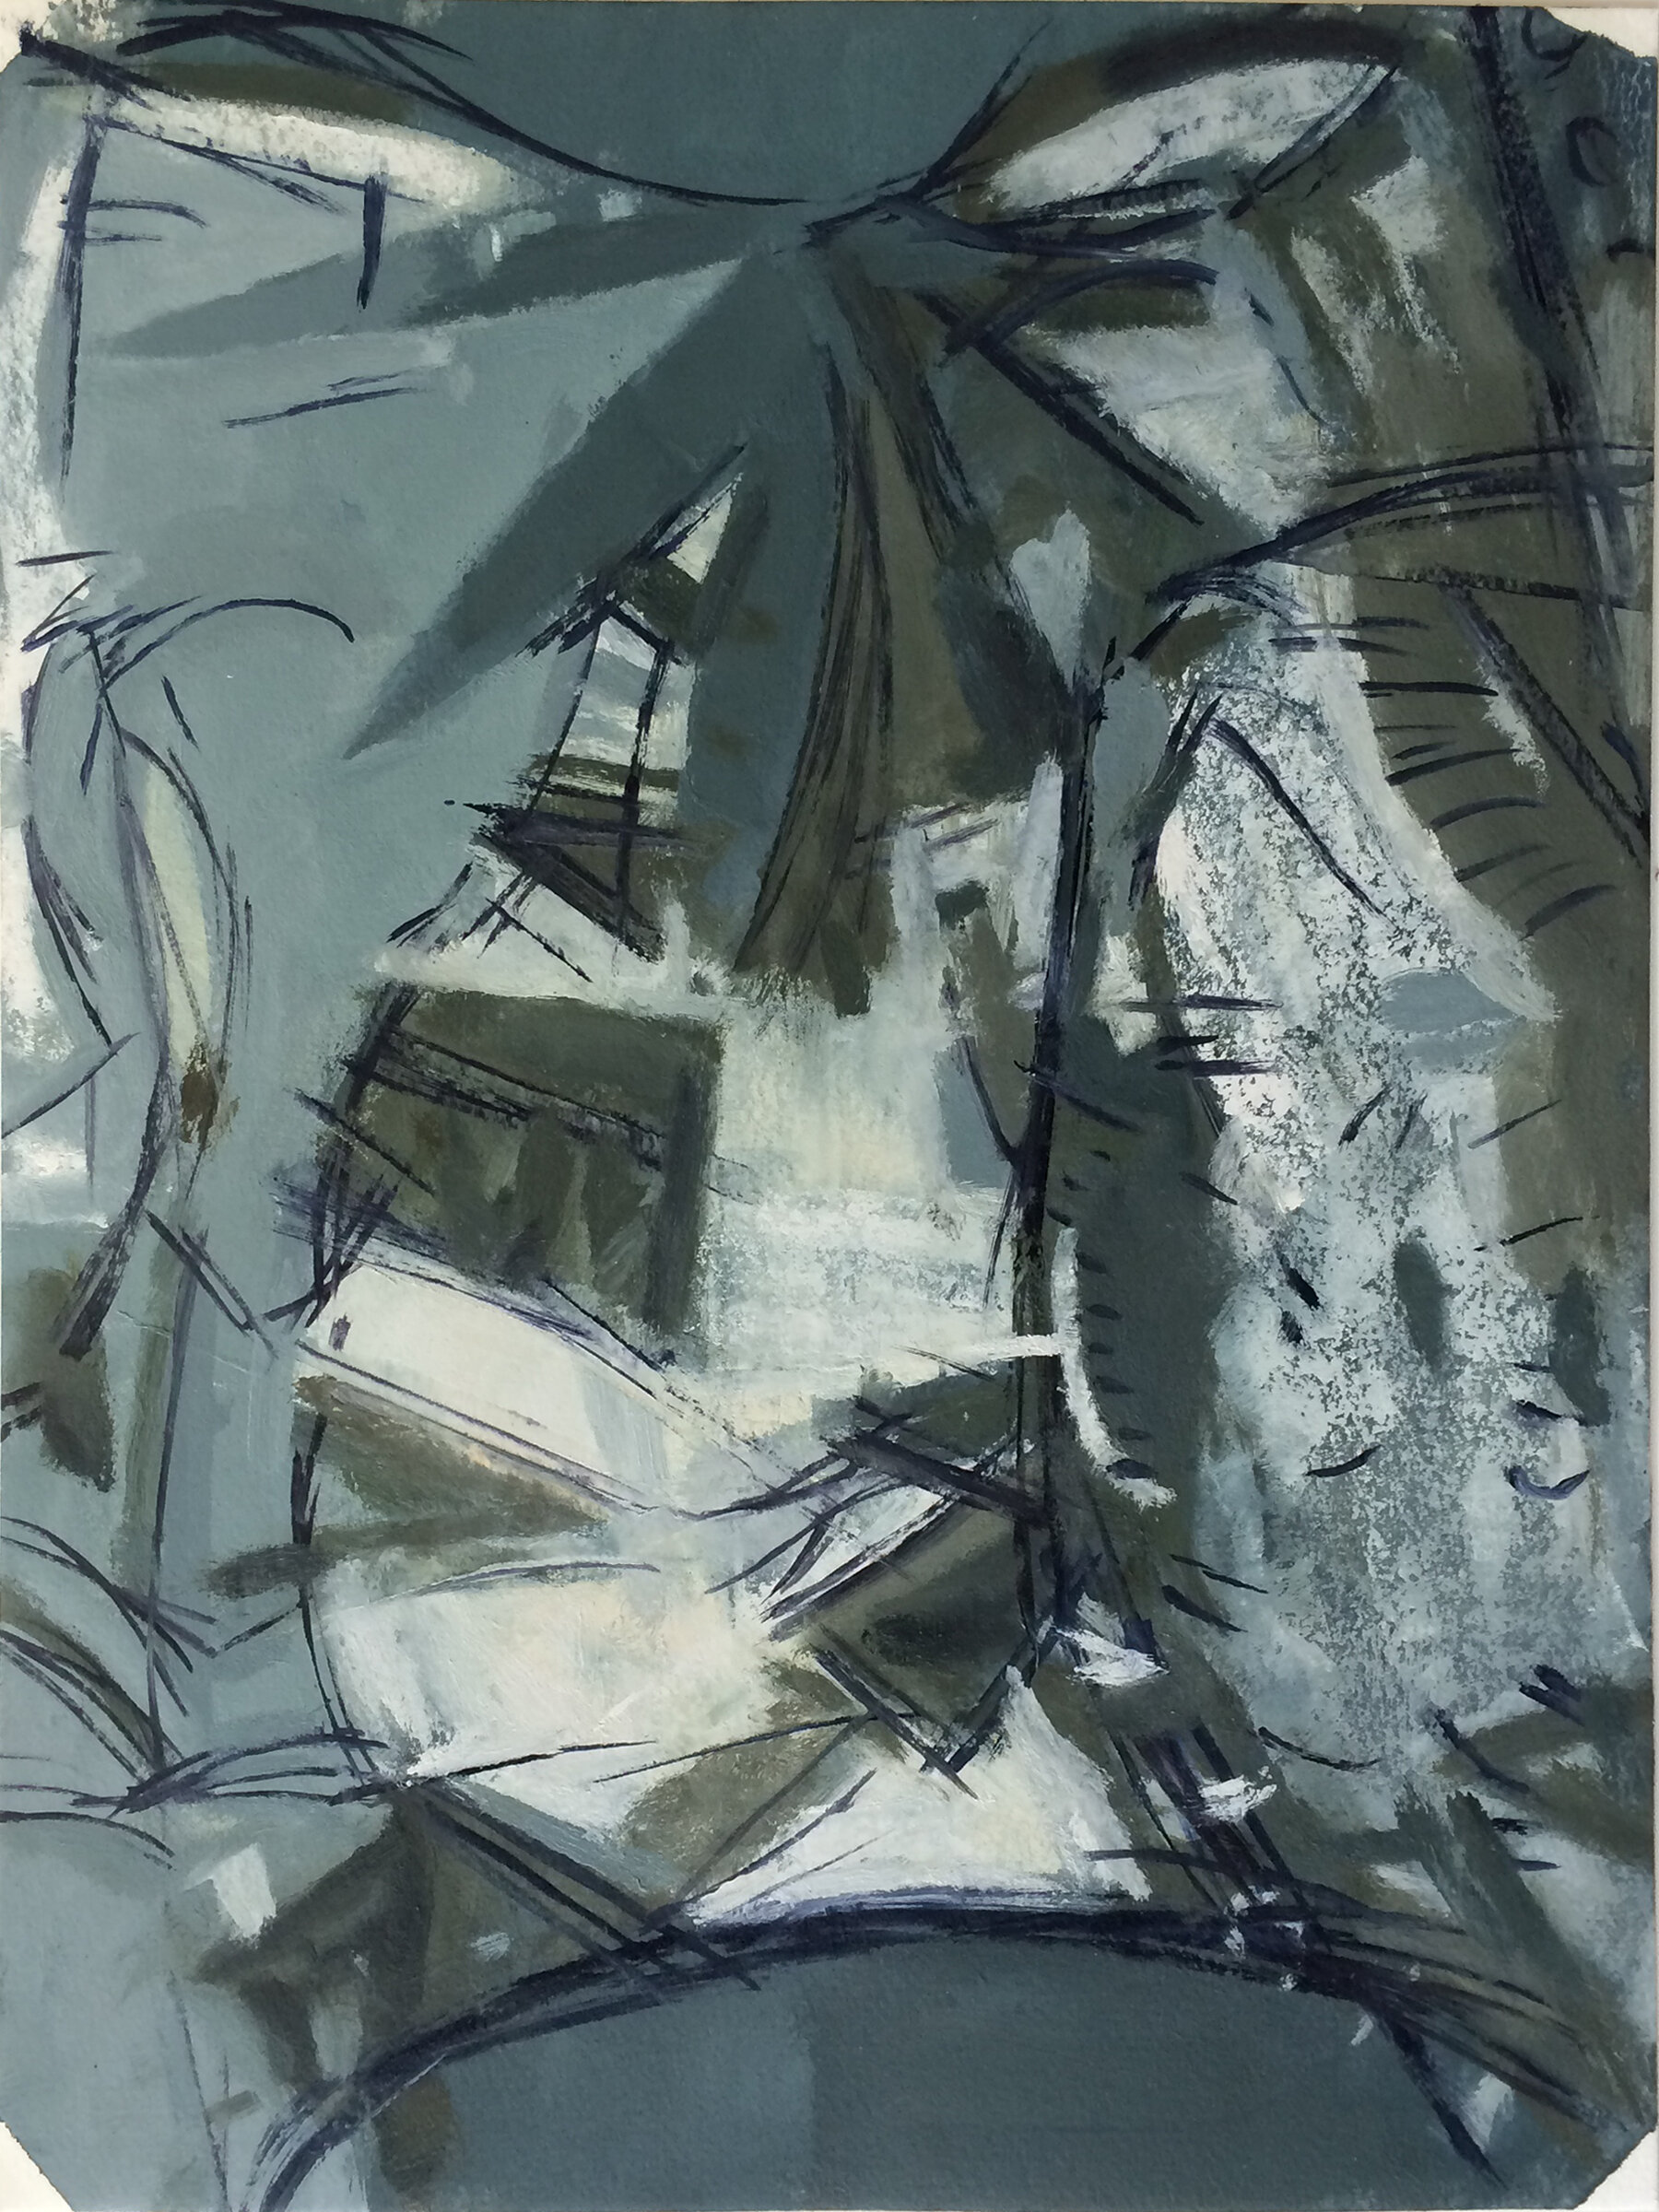  ueg_study_series 6, 2014 oil on paper 16 x 12 in 